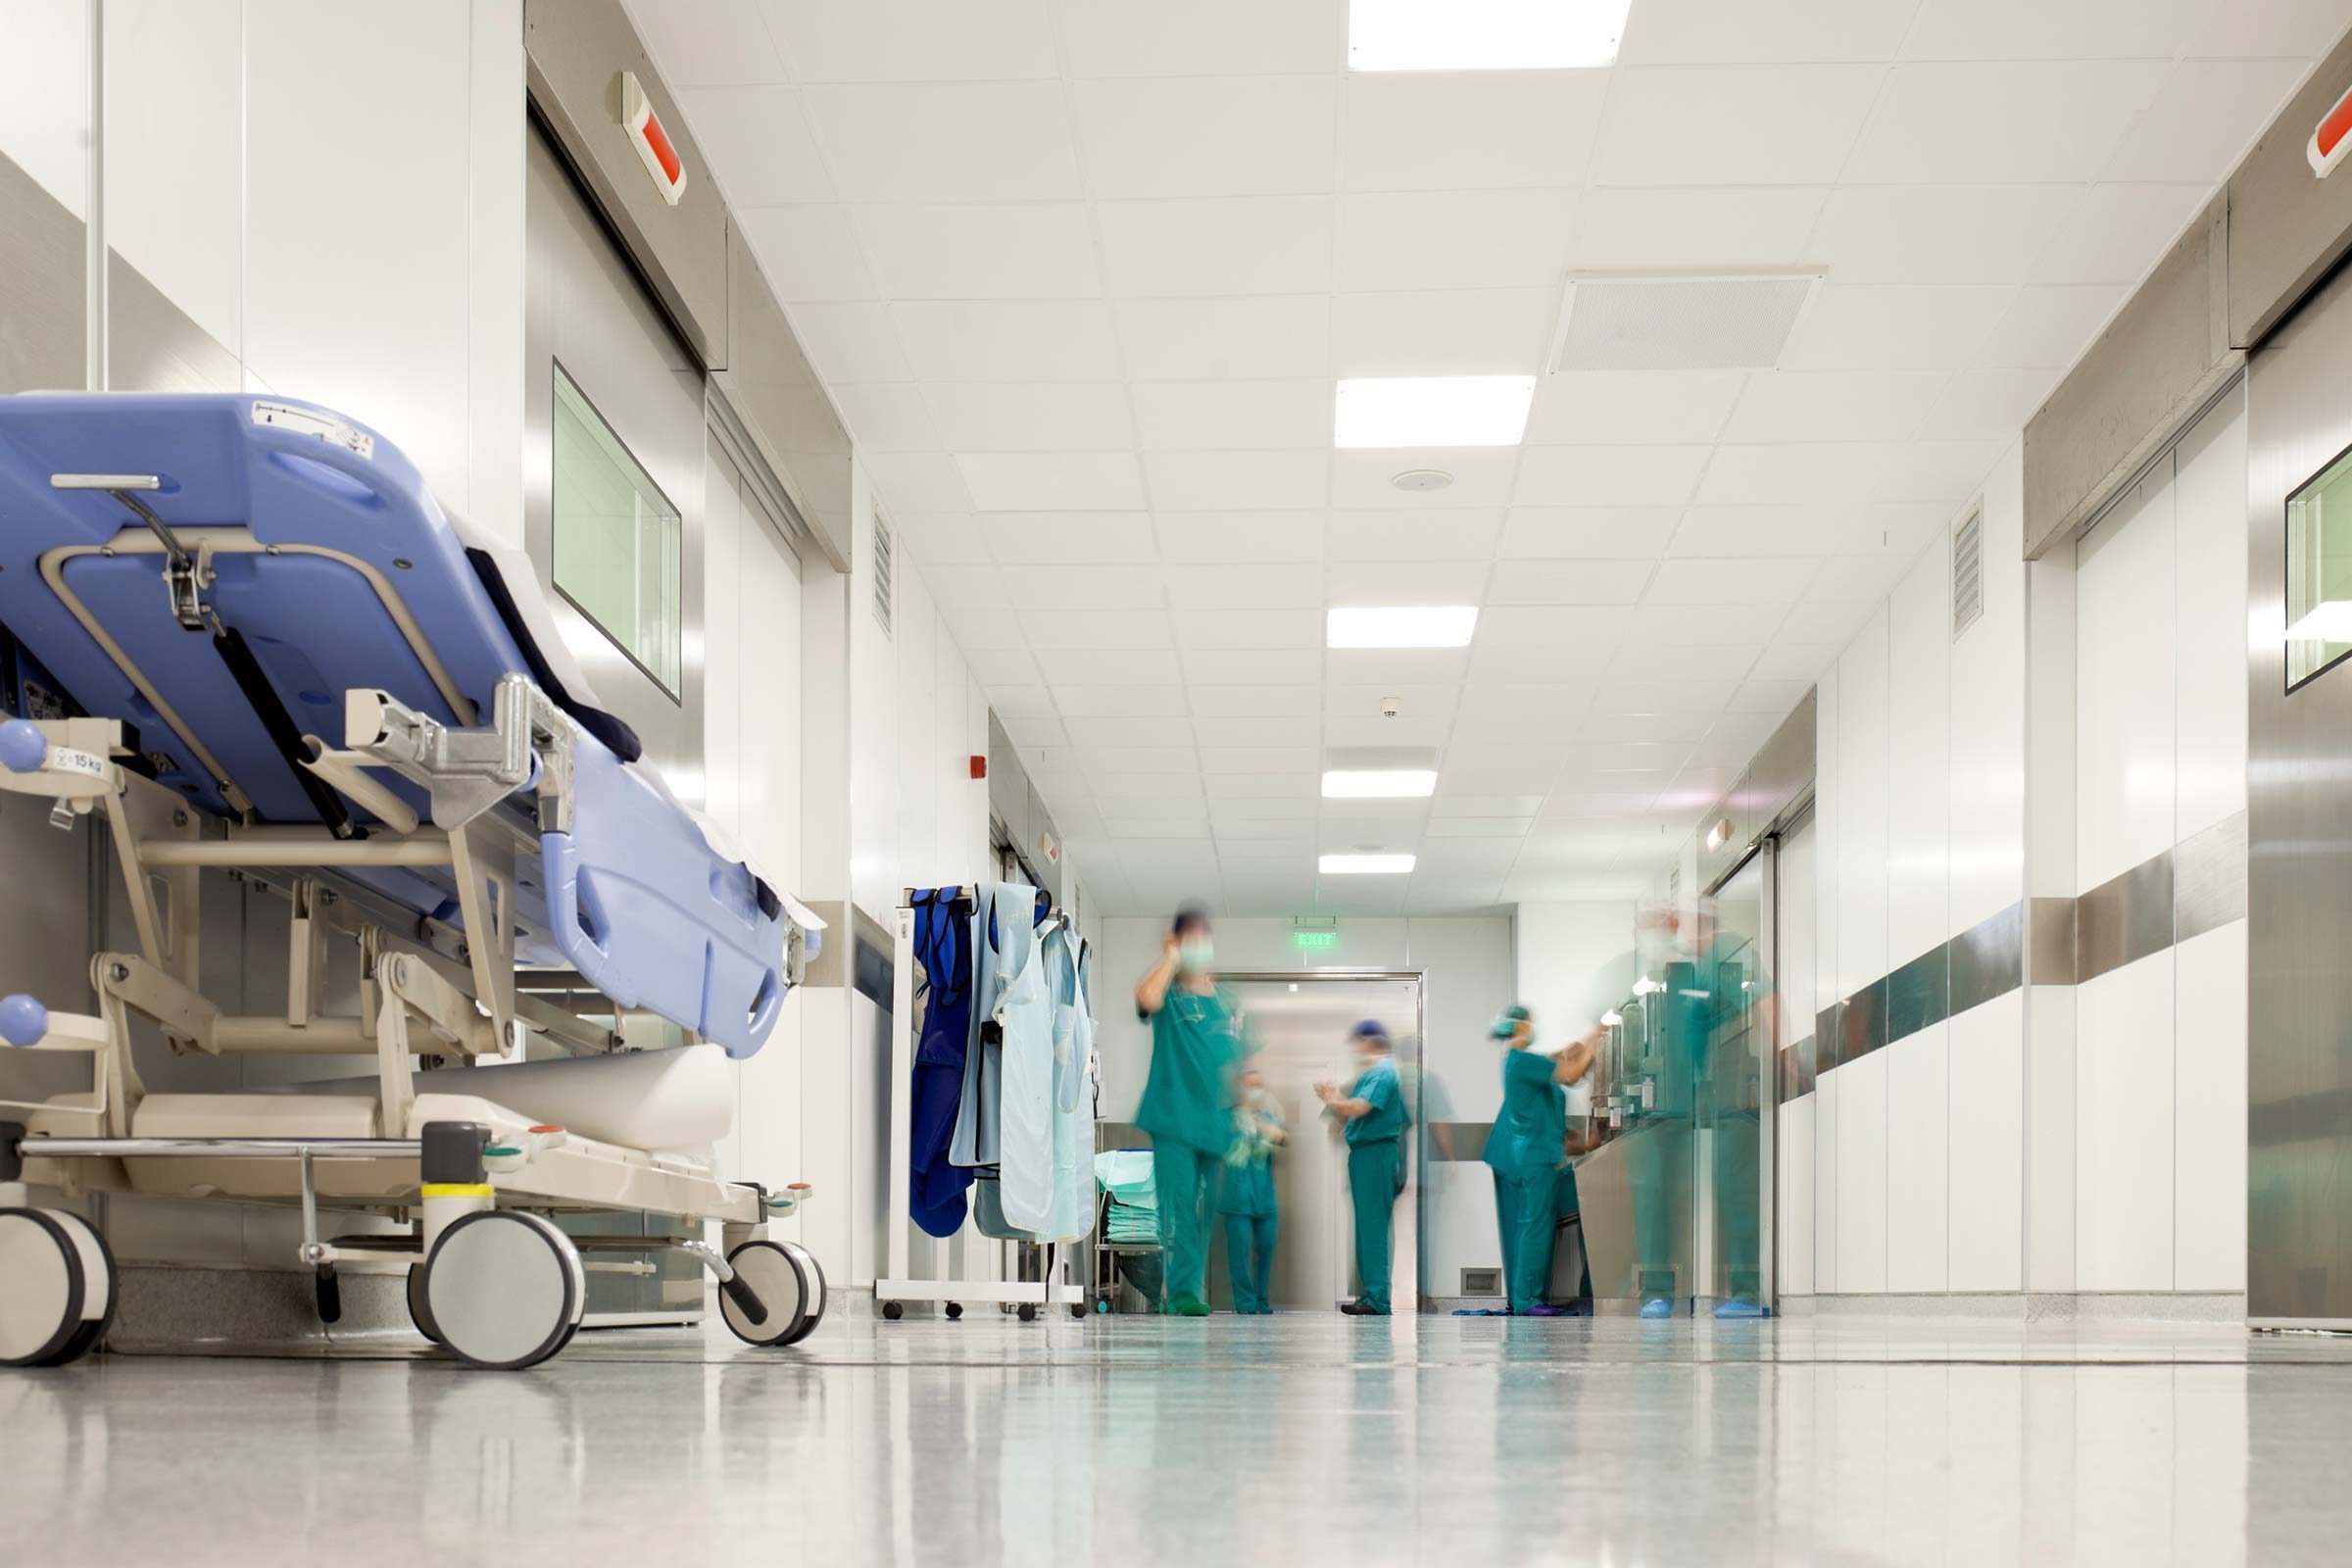 Hospitals are overcrowded